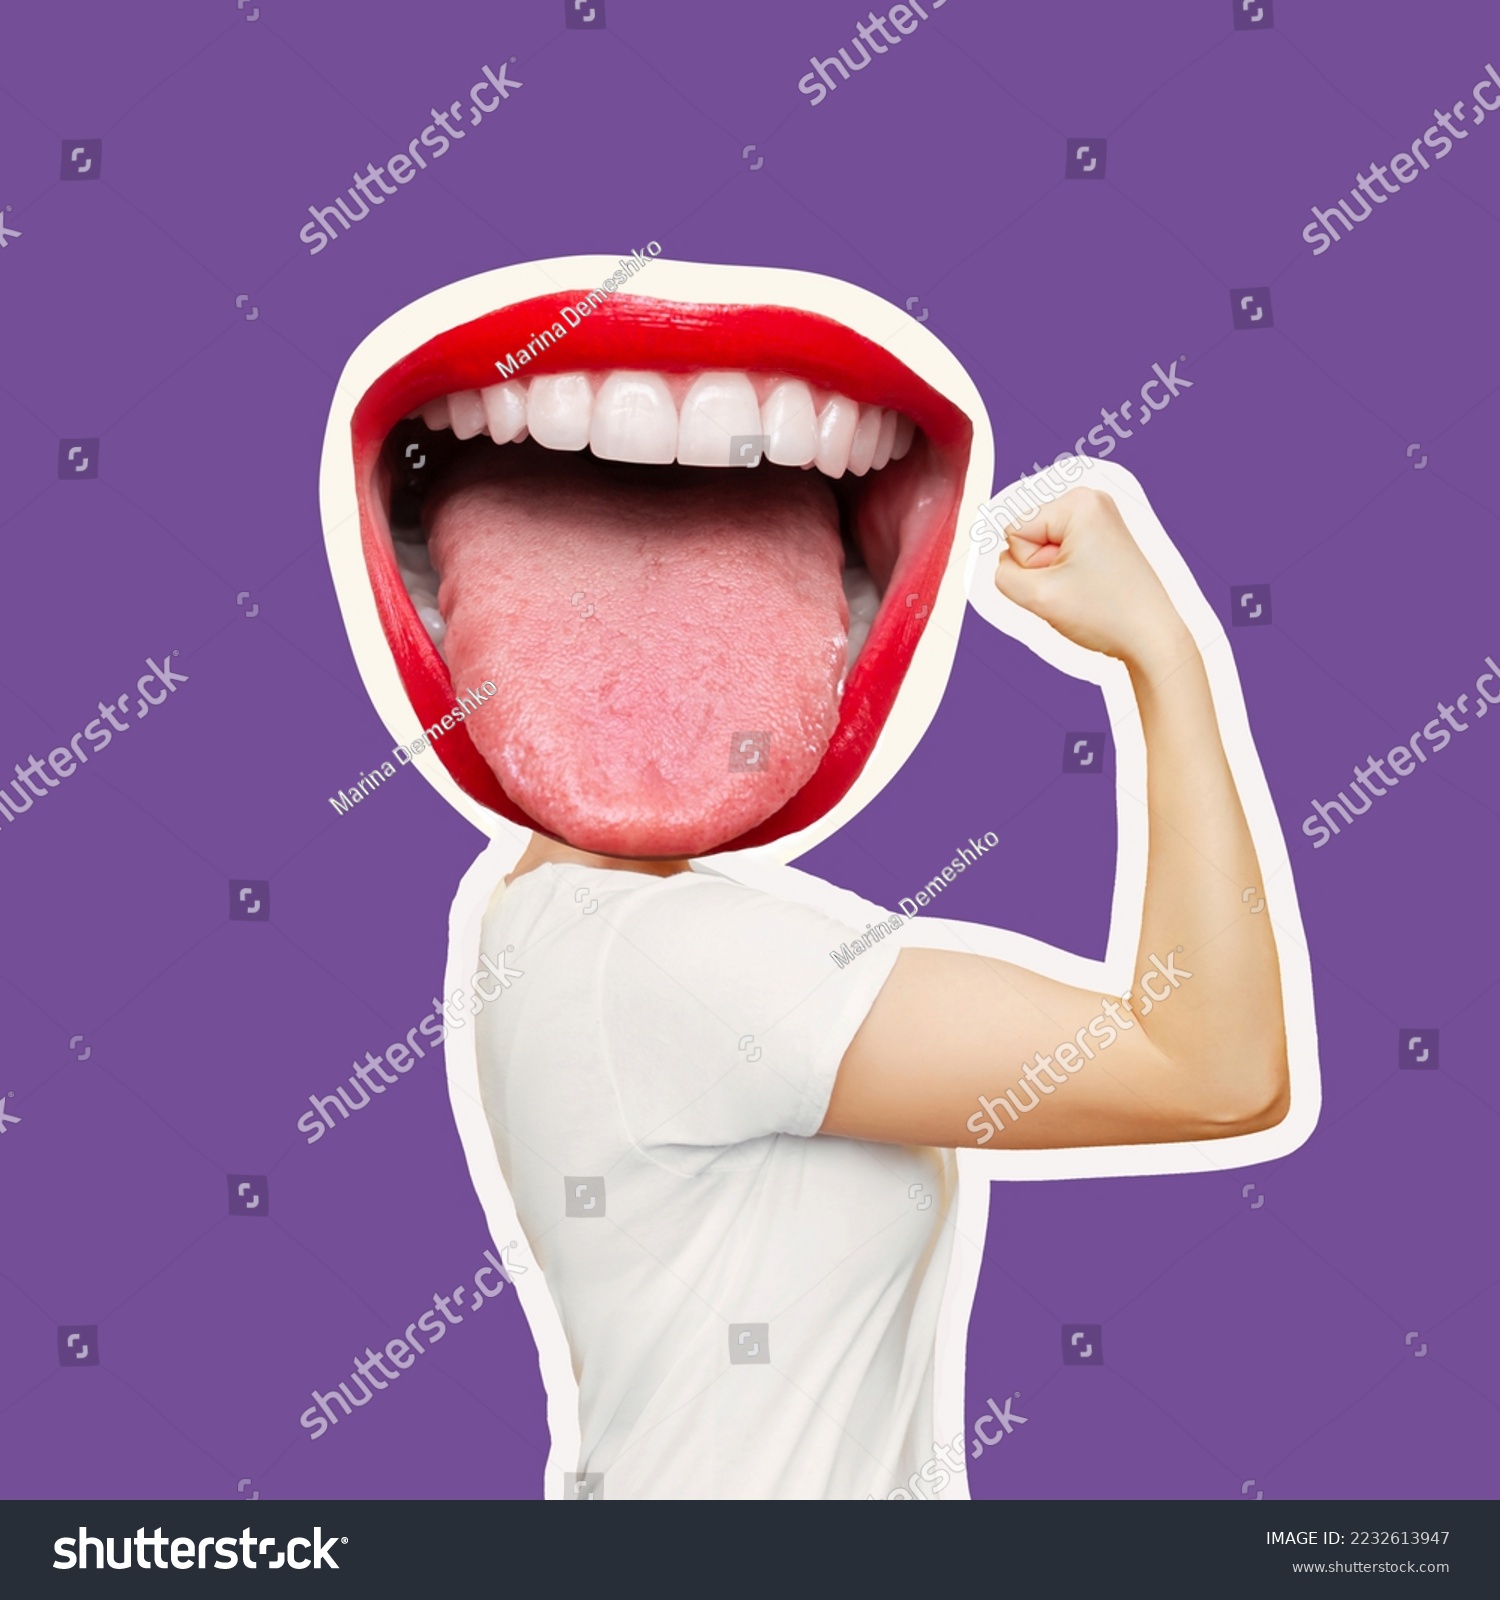 Strong woman headed by wide open mouth raises arm and shows bicep isolated on purple color background. Support women rights, feminism. Trendy collage in magazine style. Contemporary art. Modern design #2232613947